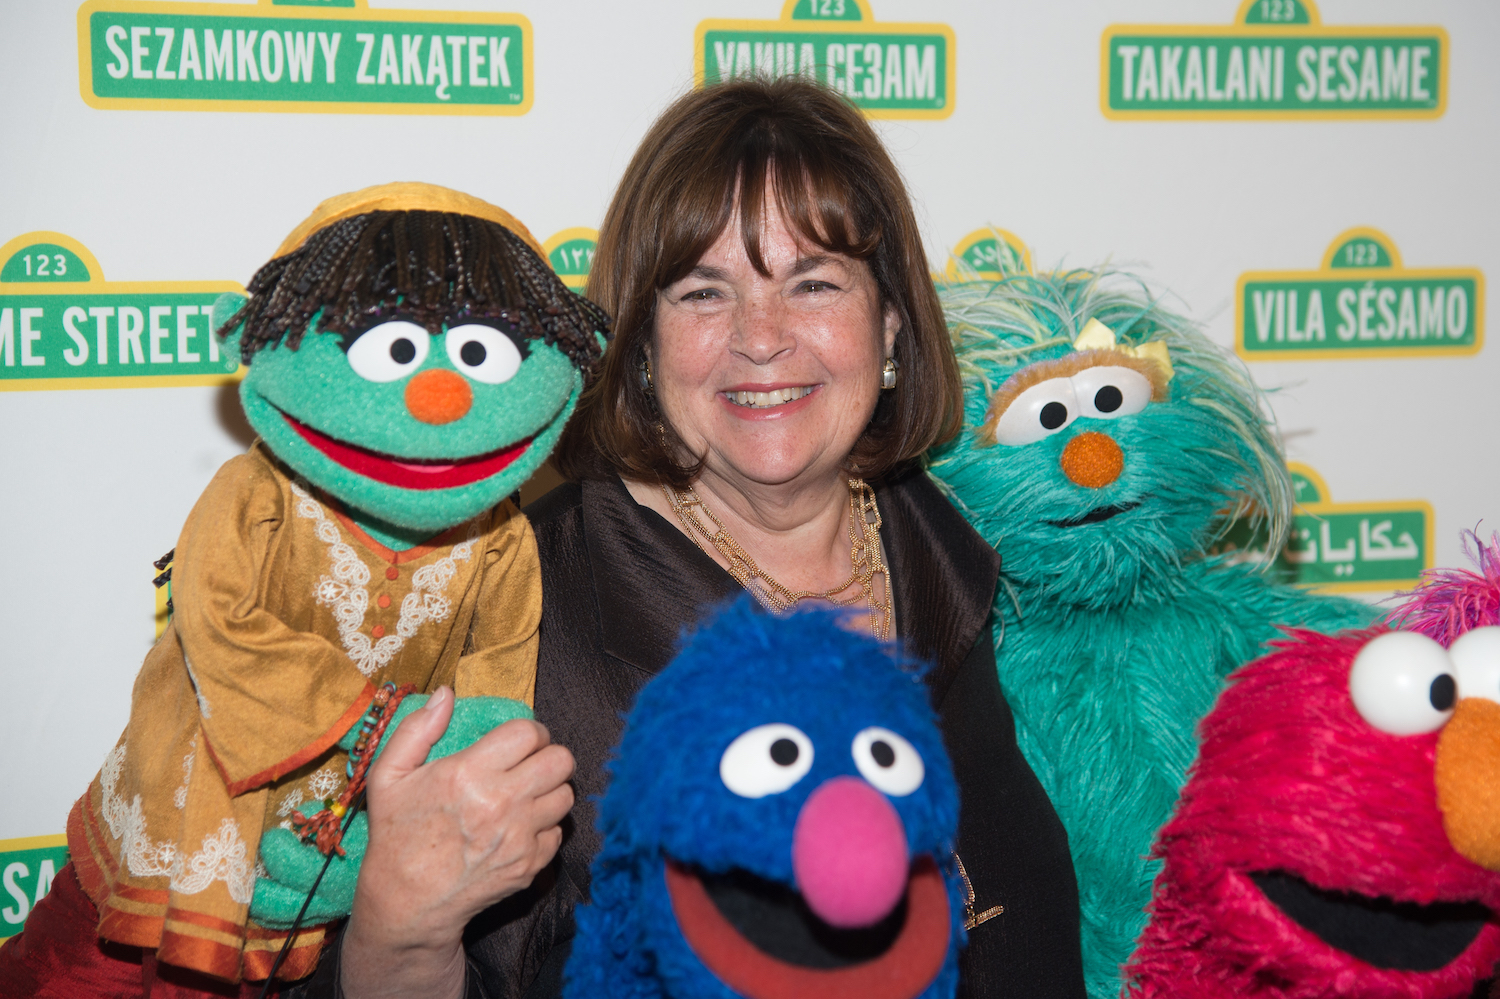 Barefoot Contessa Ina Garten and Muppets attend the Sesame Workshop's 13th Annual Benefit Gala in 2015